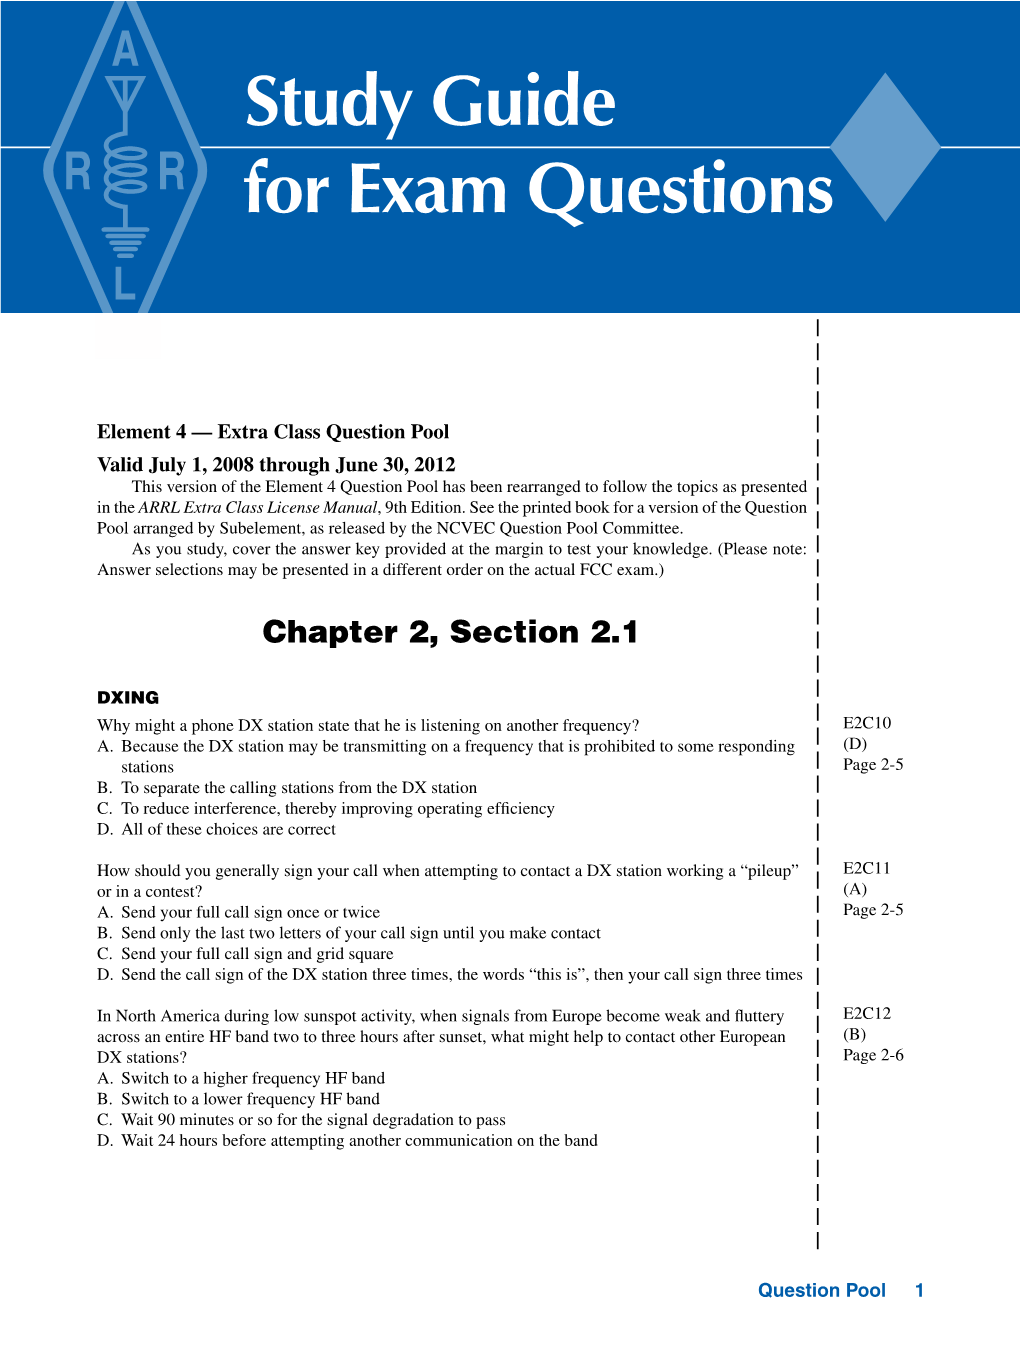 Study Guide for Exam Questions�